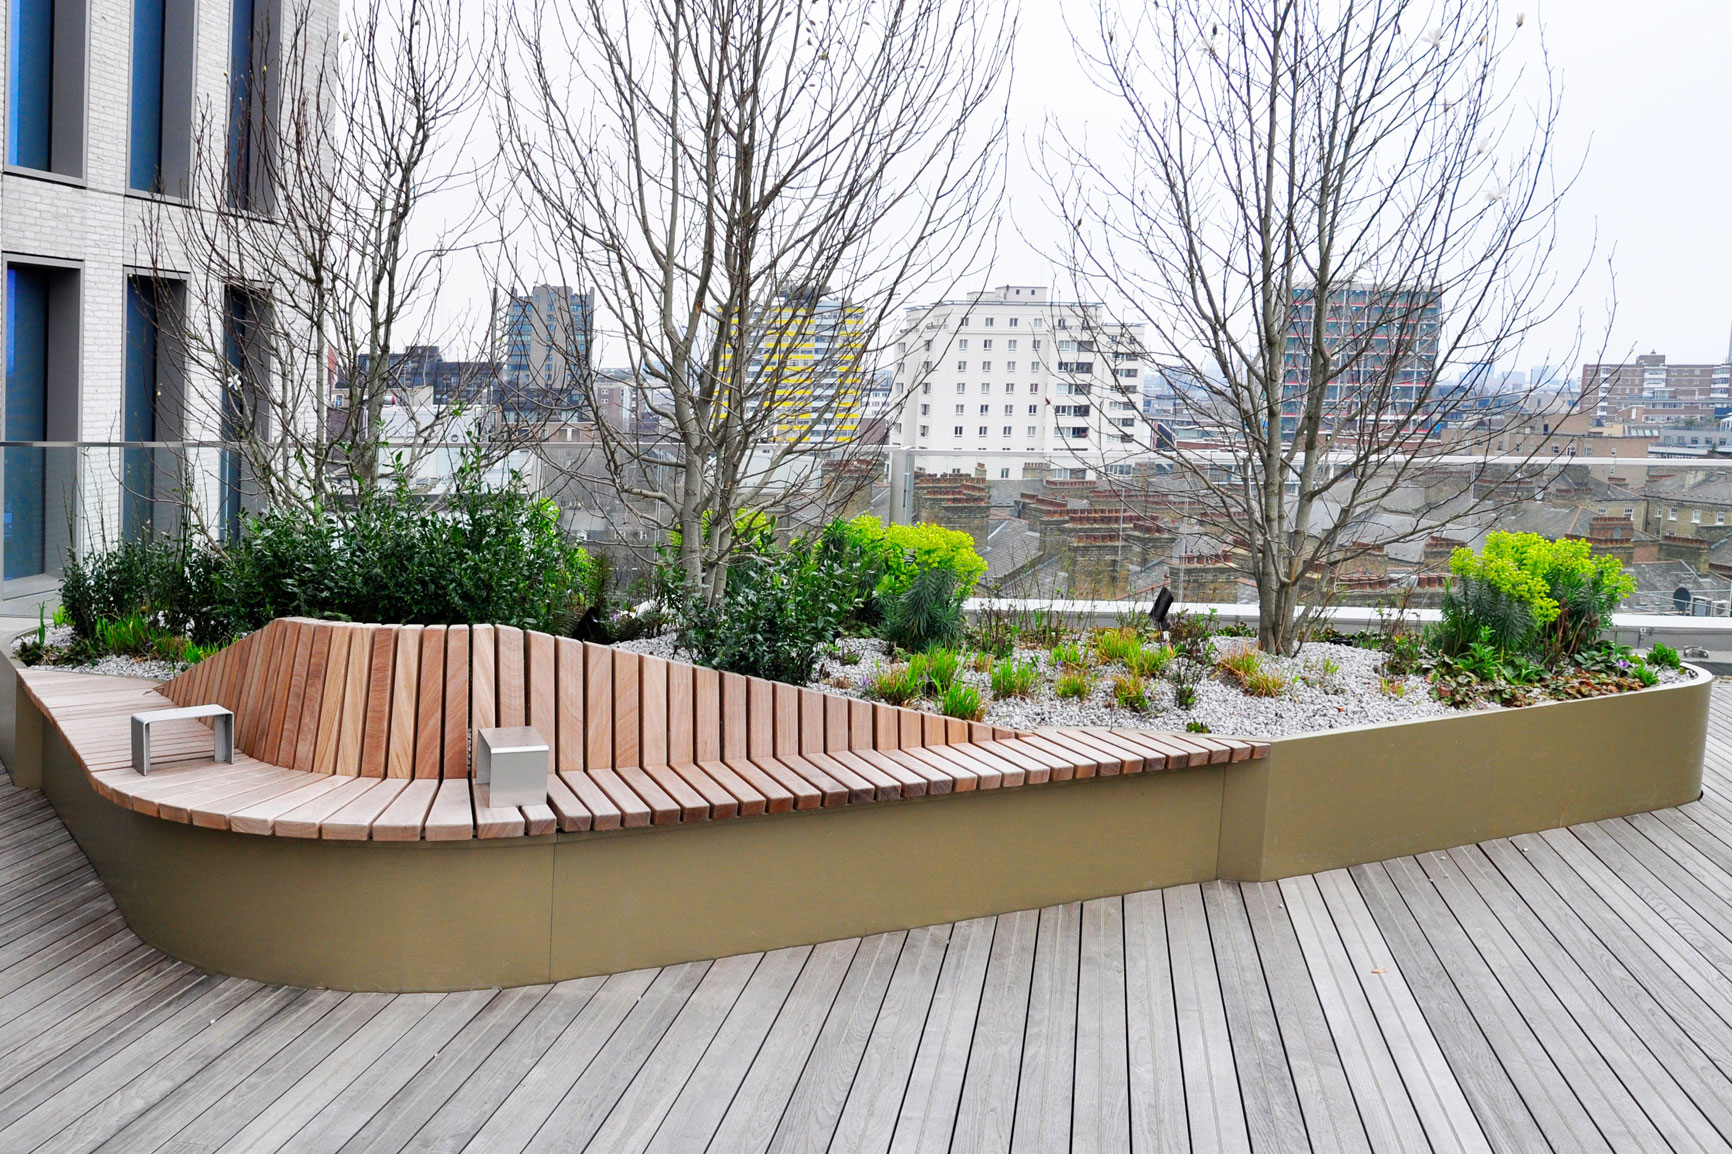 How to make Rooftop Gardens compliant with Fire Safety Regulations